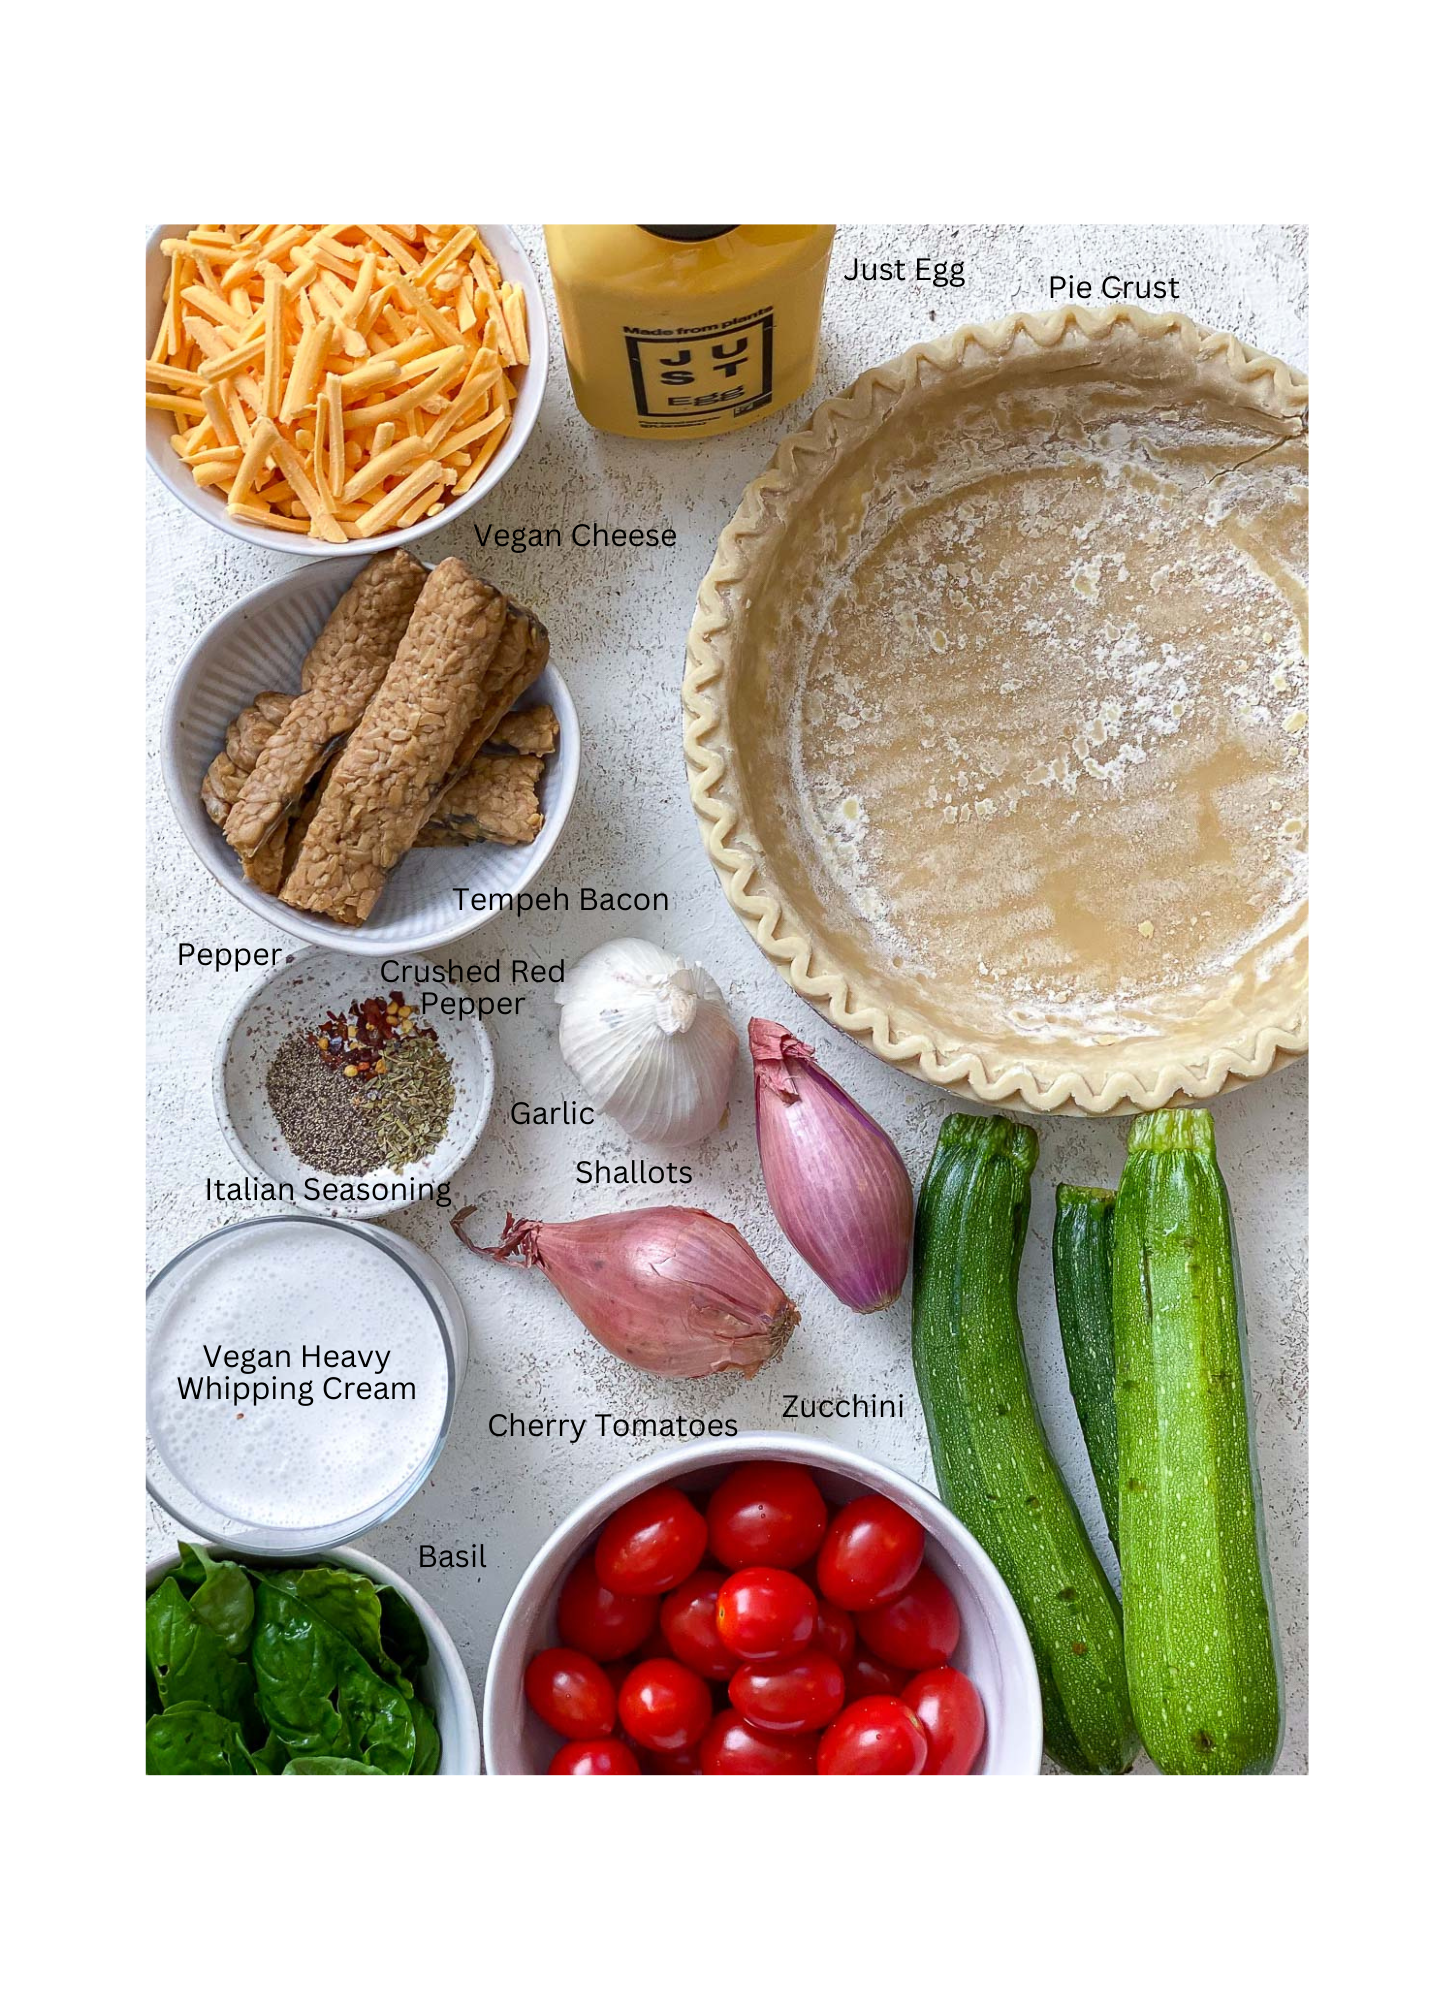 ingredients for Just Egg Quiche measured out against a white surface